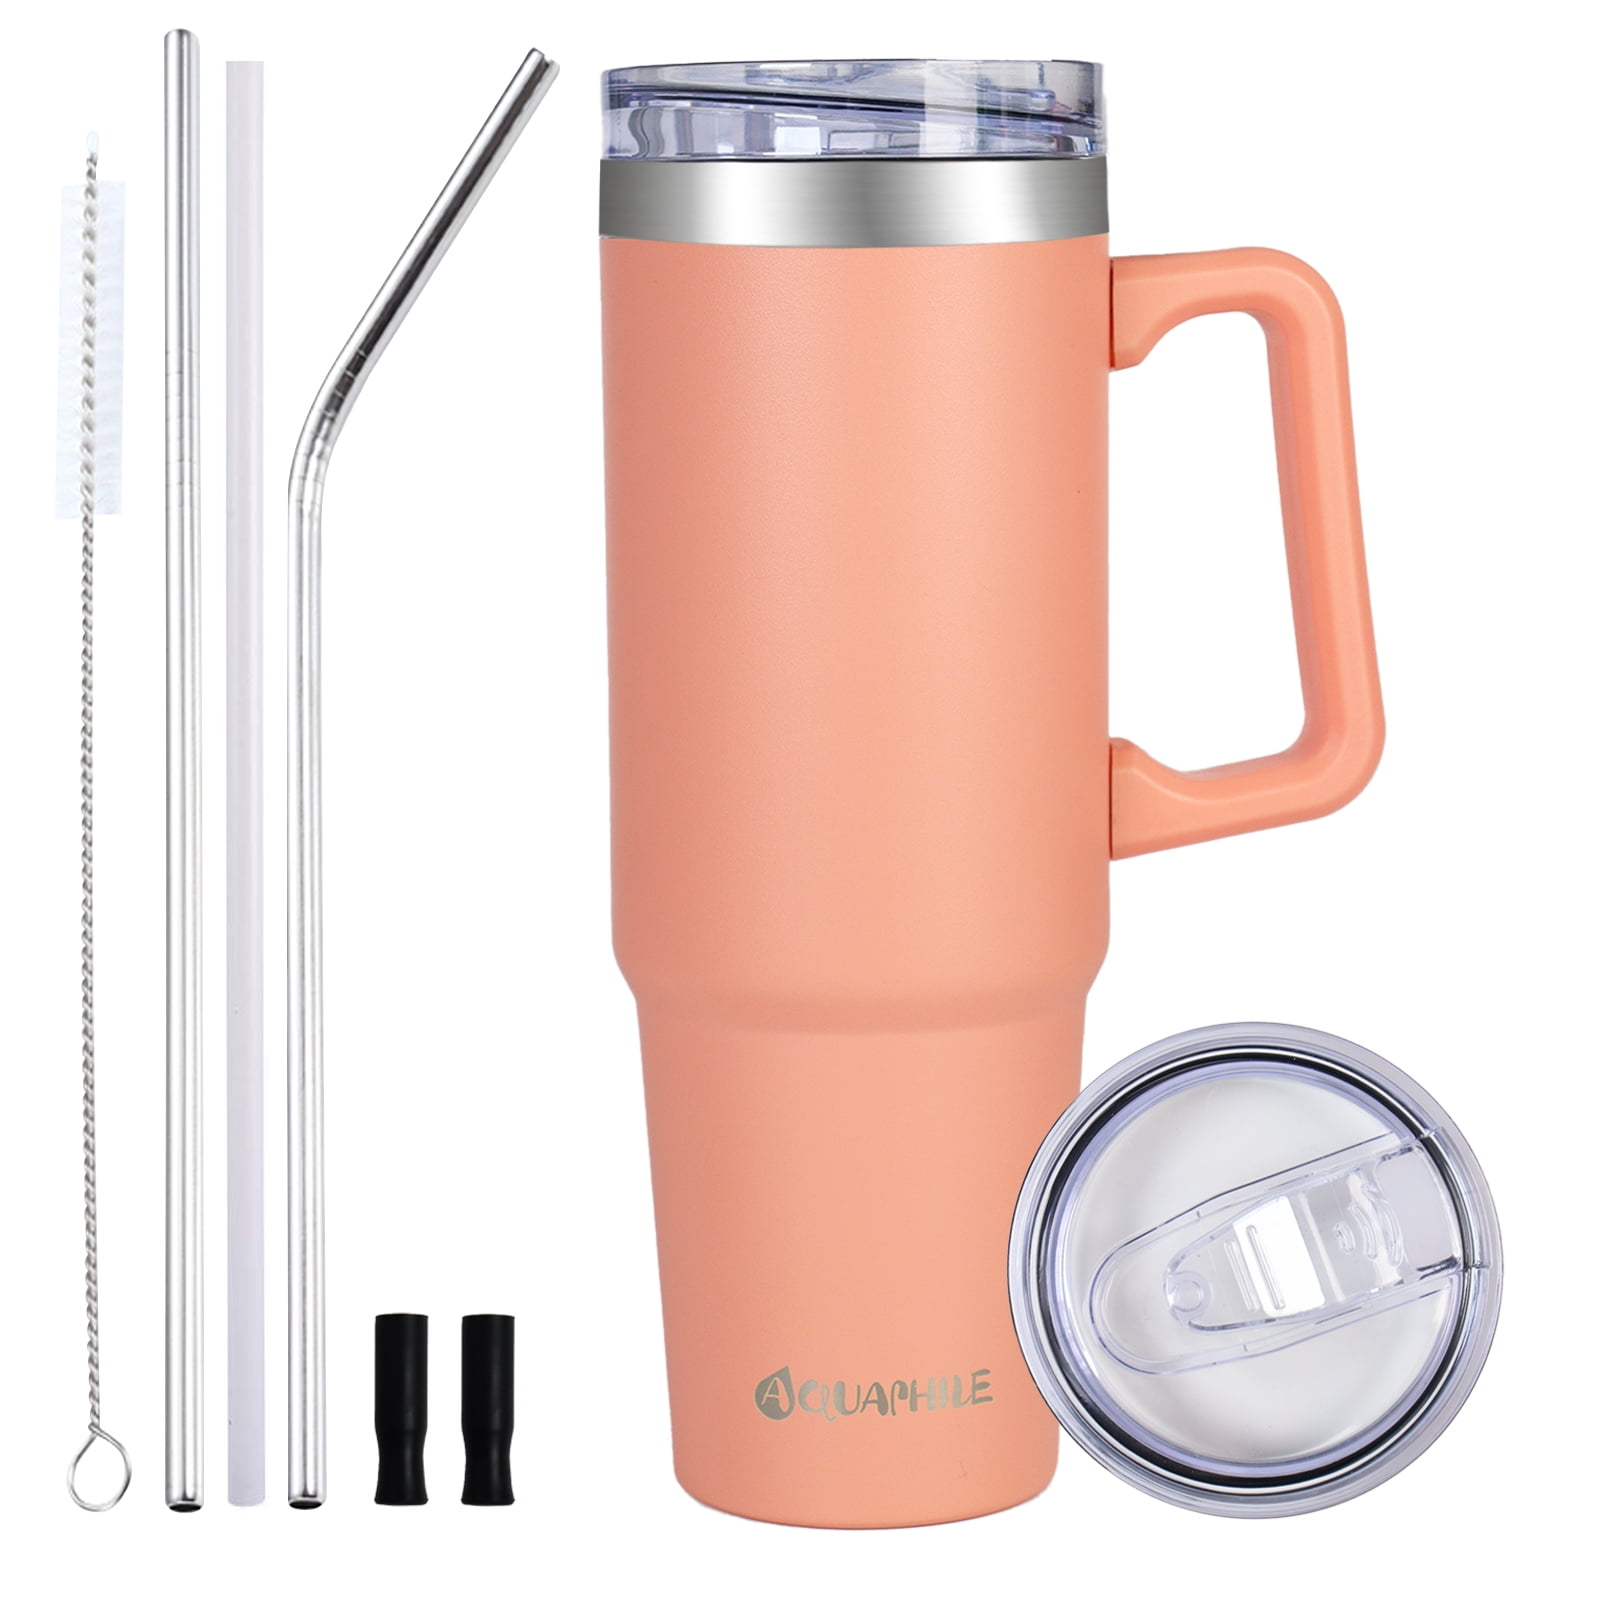 AQUAPHILE Tumbler with Handle, 35oz Insulated Coffee Mug with Leak-proof  Lid and Straw, Stainless Steel Travel Mug for Hot or Cold Drinks,Peach Pink  